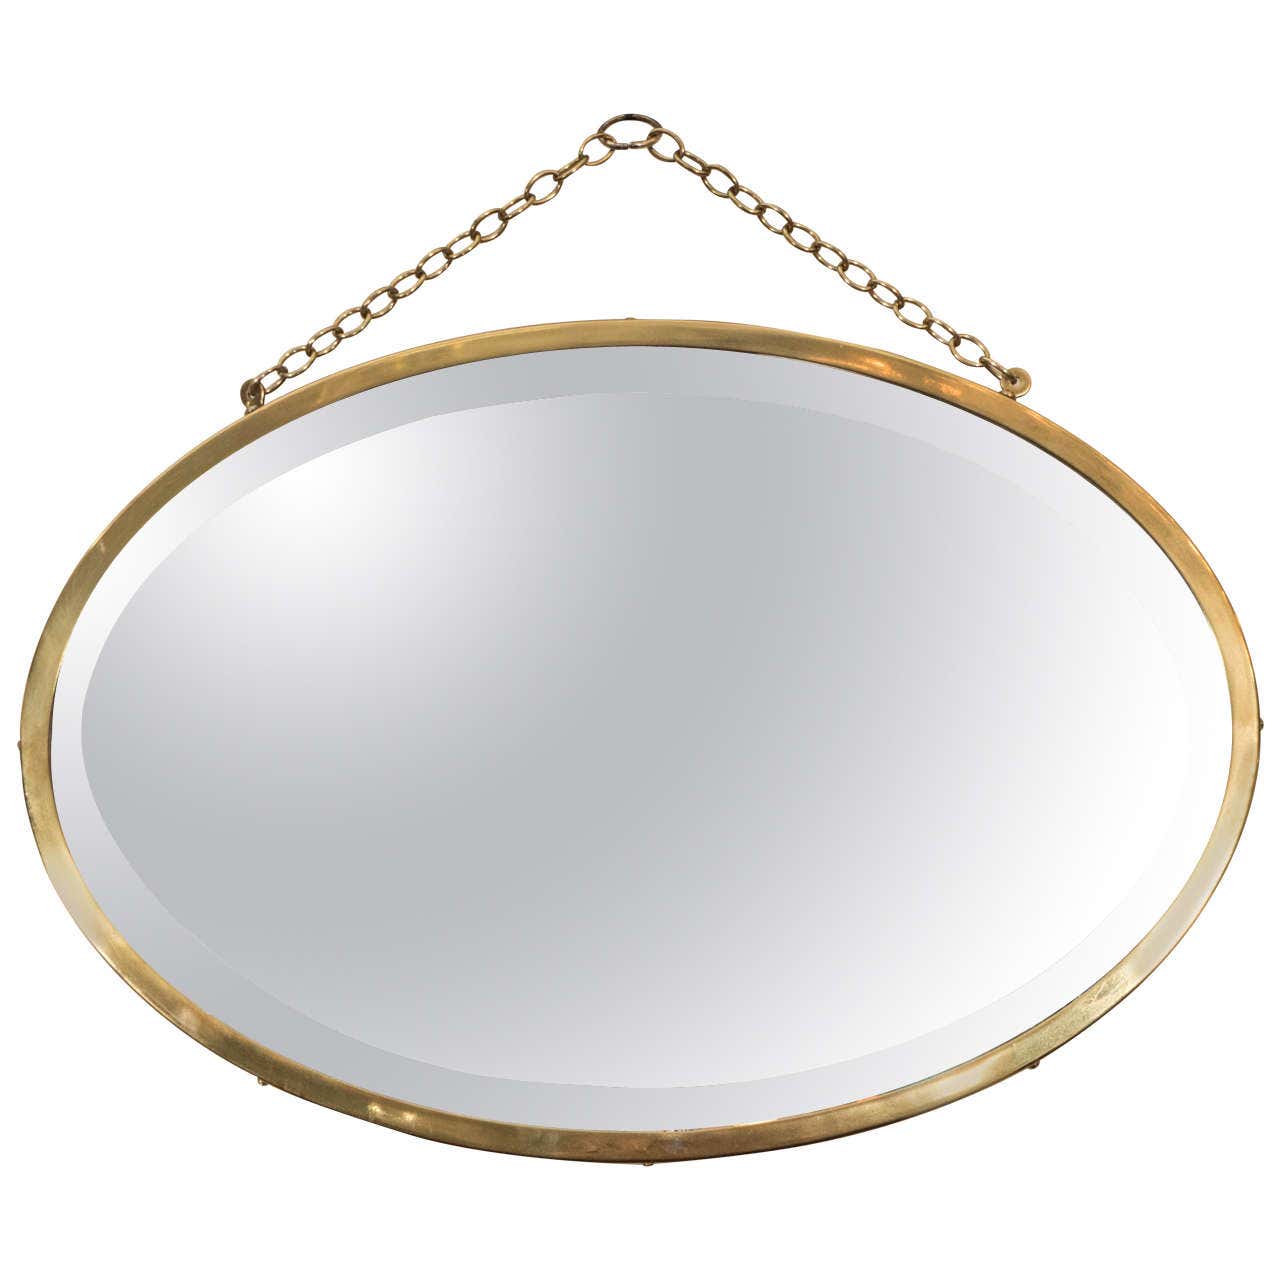 Midcentury Oval Brass Framed Beveled Glass Wall Mirror At 1stdibs